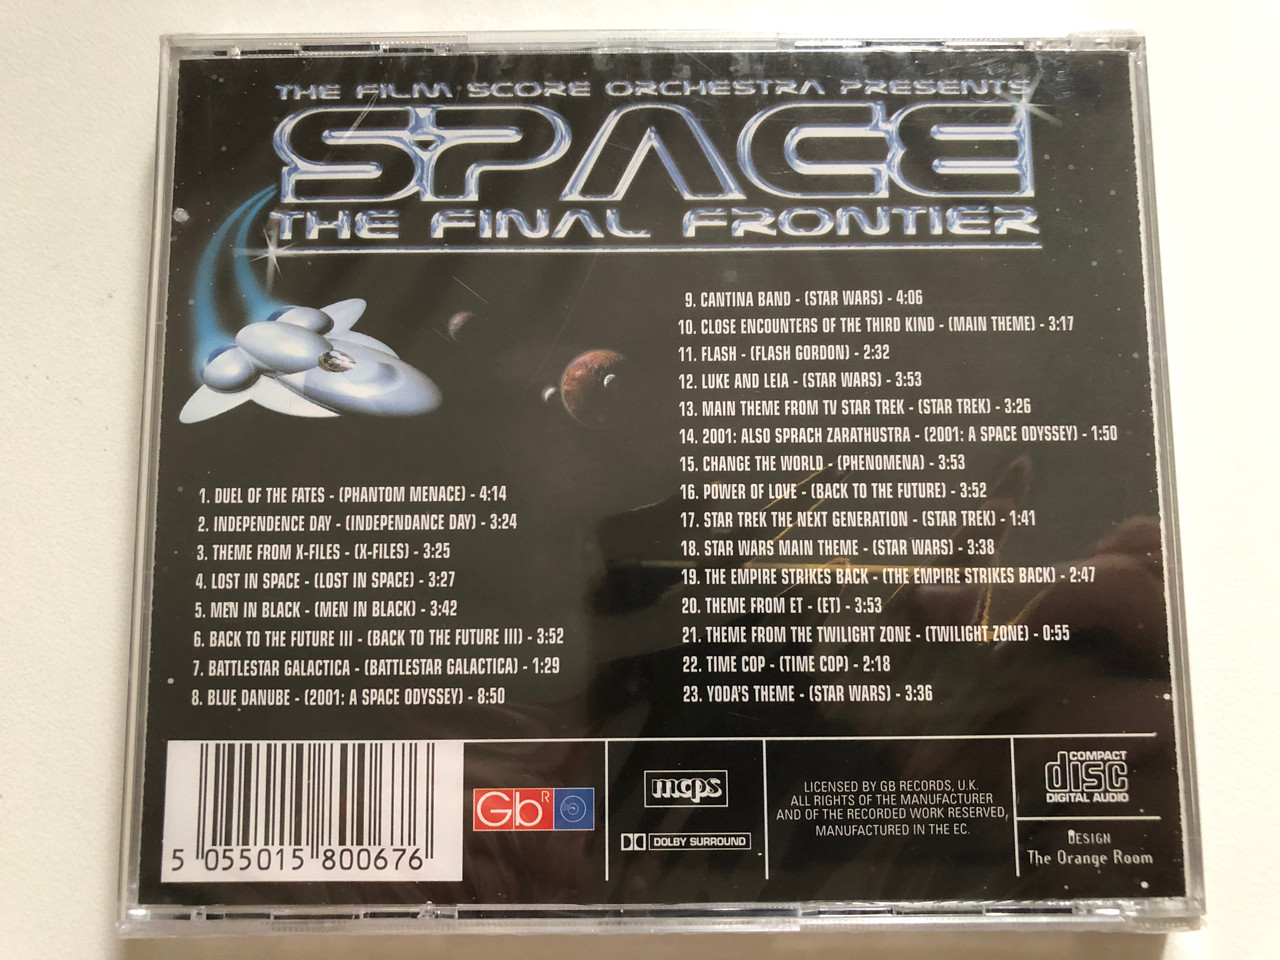 https://cdn10.bigcommerce.com/s-62bdpkt7pb/products/0/images/306569/The_Film_Score_Orchestra_Presents_Space_The_Final_Frontier_-_The_Phantom_Menace_Independence_Day_X_Files_Lost_In_Space_2001_Space_Odyssey_and_many_more_Cedar_Audio_CD_1-1067_2__07362.1698309076.1280.1280.JPG?c=2